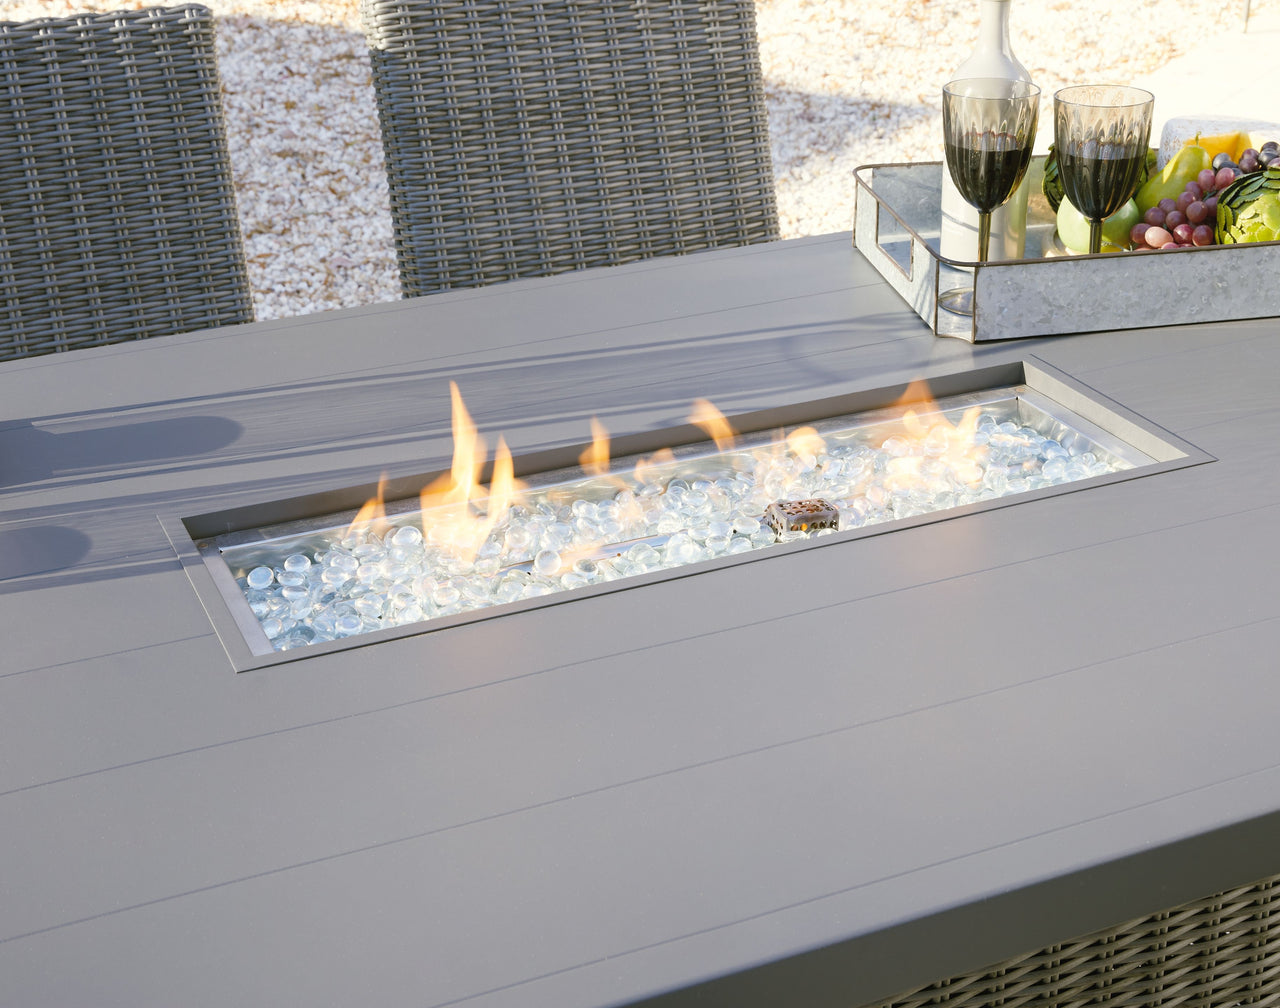 Palazzo - Gray - Rect Bar Table W/Fire Pit - Tony's Home Furnishings